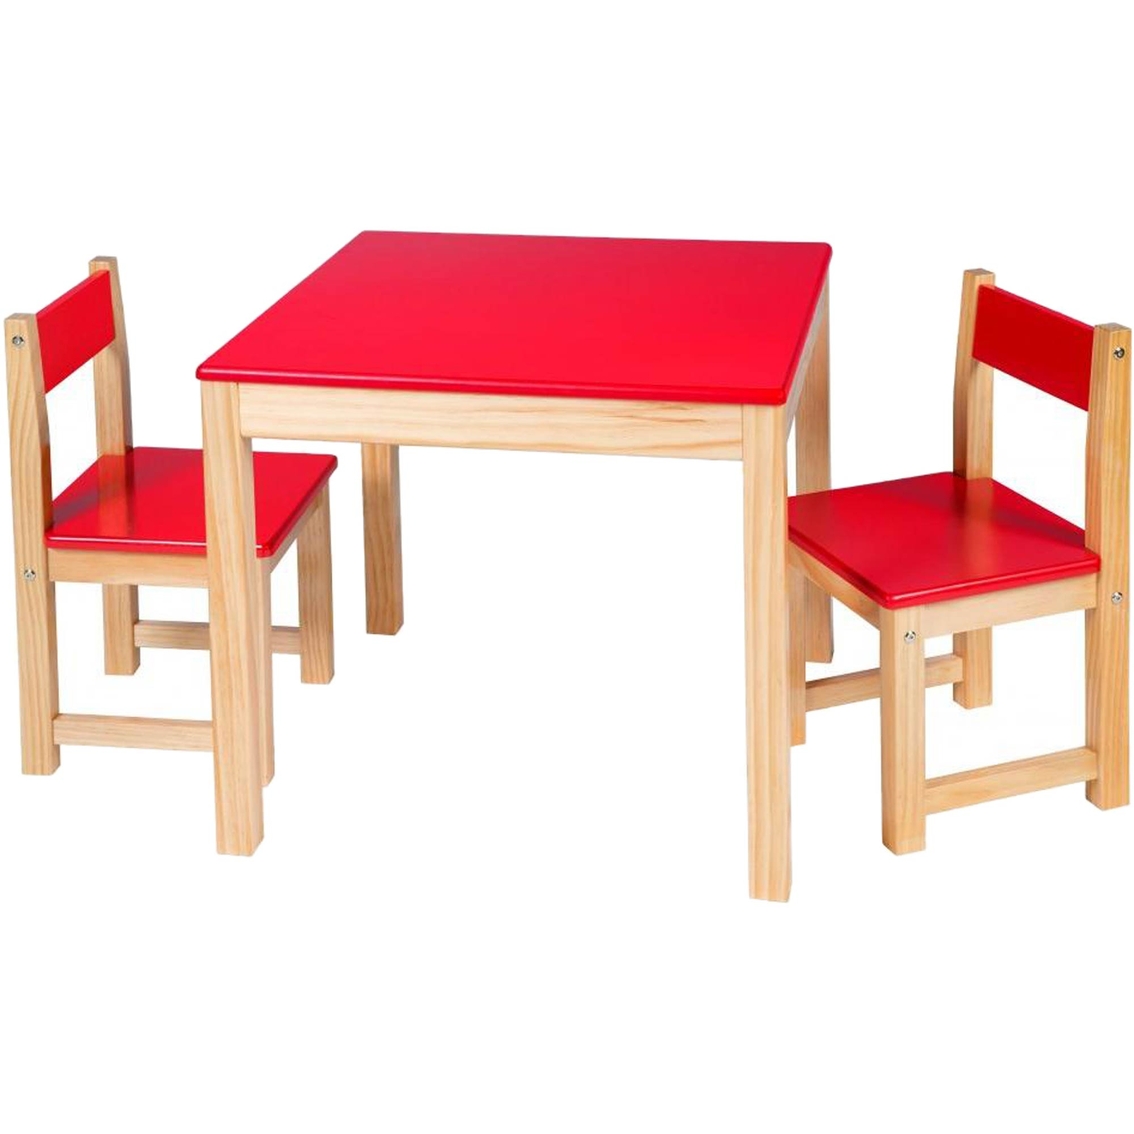 Alex Toys Artist Studio Wooden Table And Chair Set Red Art